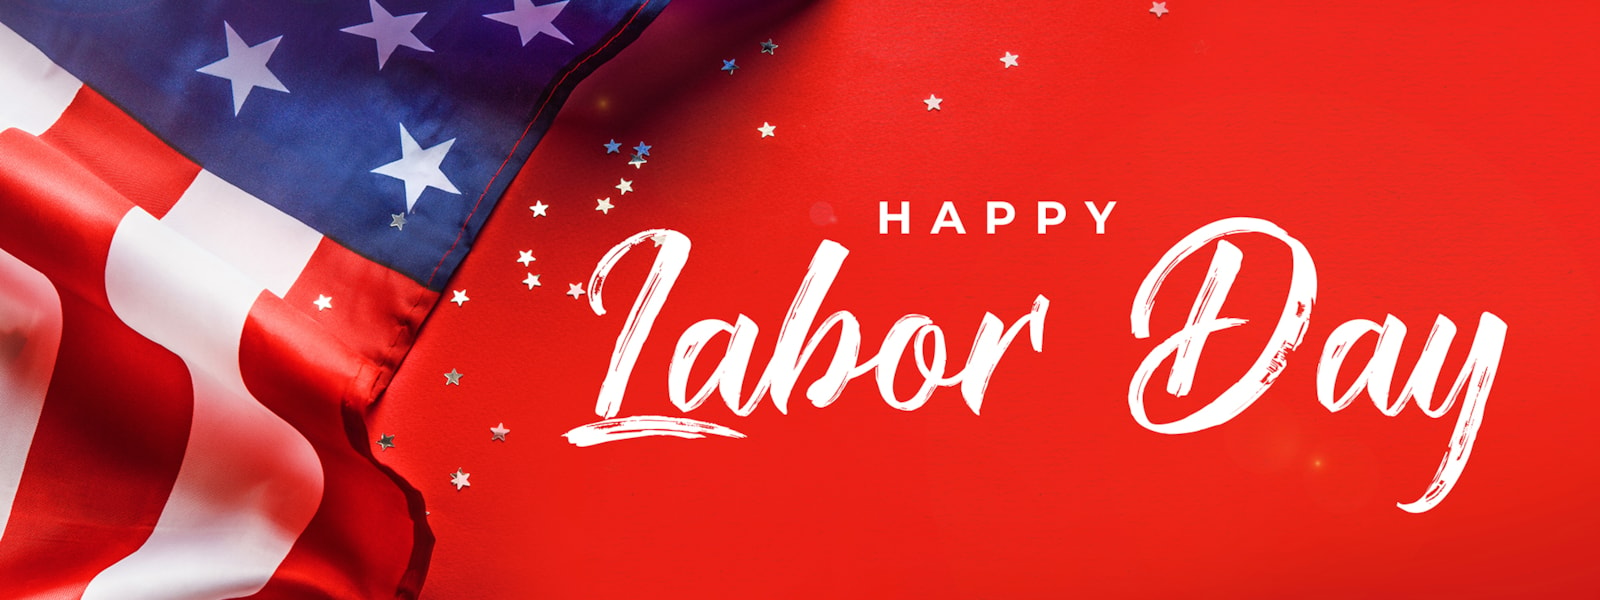 Happy Labor Day banner with American flag